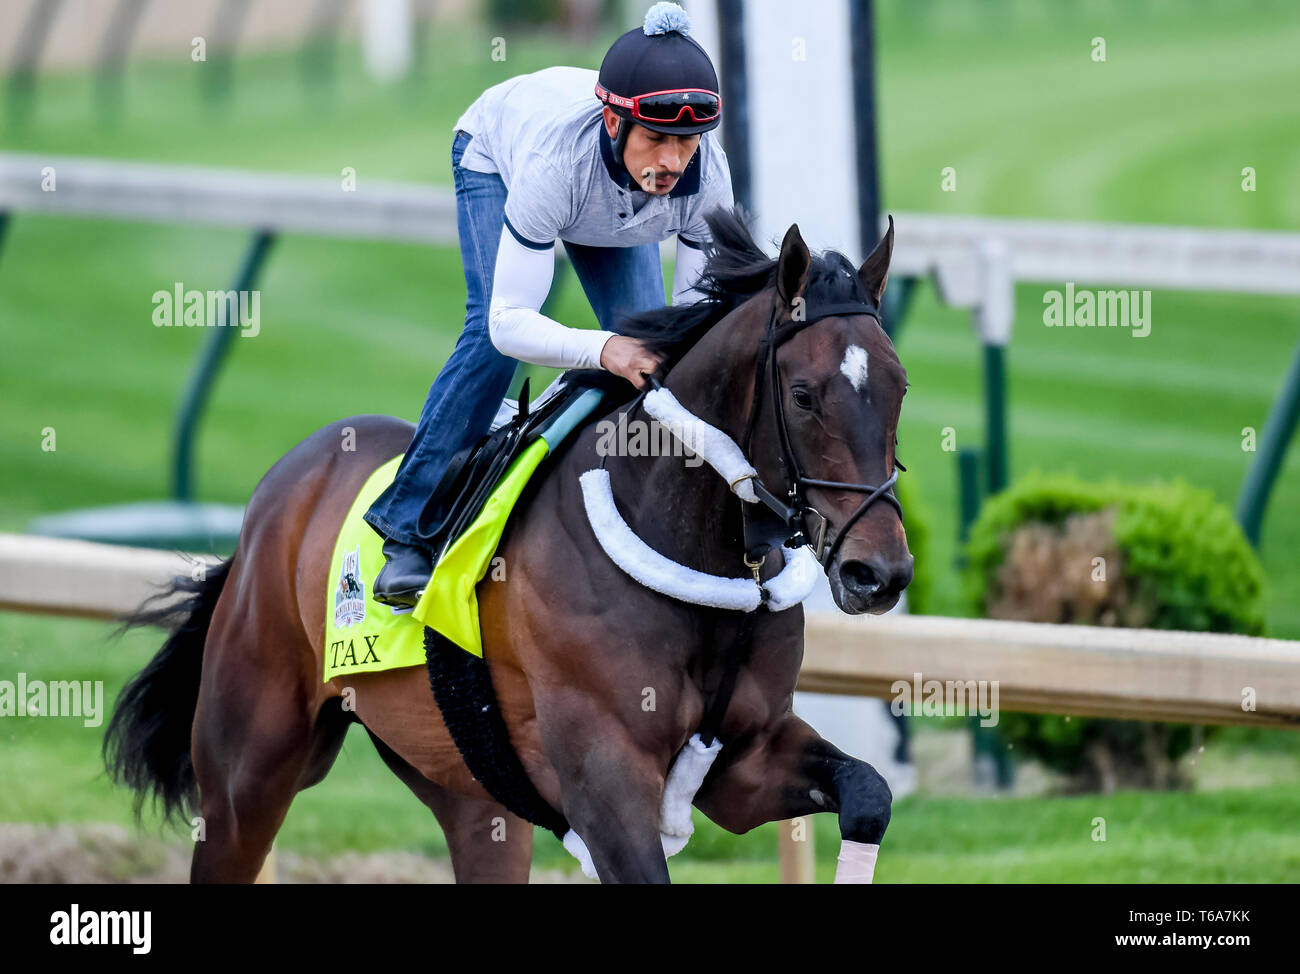 Louisville, Kentucky, USA. 30th Apr, 2019. LOUISVILLE, KENTUCKY - APRIL 30: Tax, trained by Danny Gargan, exercises in preparation for the Kentucky Derby at Churchill Downs in Louisville, Kentucky on April 30, 2019. John Voorhees/Eclipse Sportswire/CSM/Alamy Live News Stock Photo